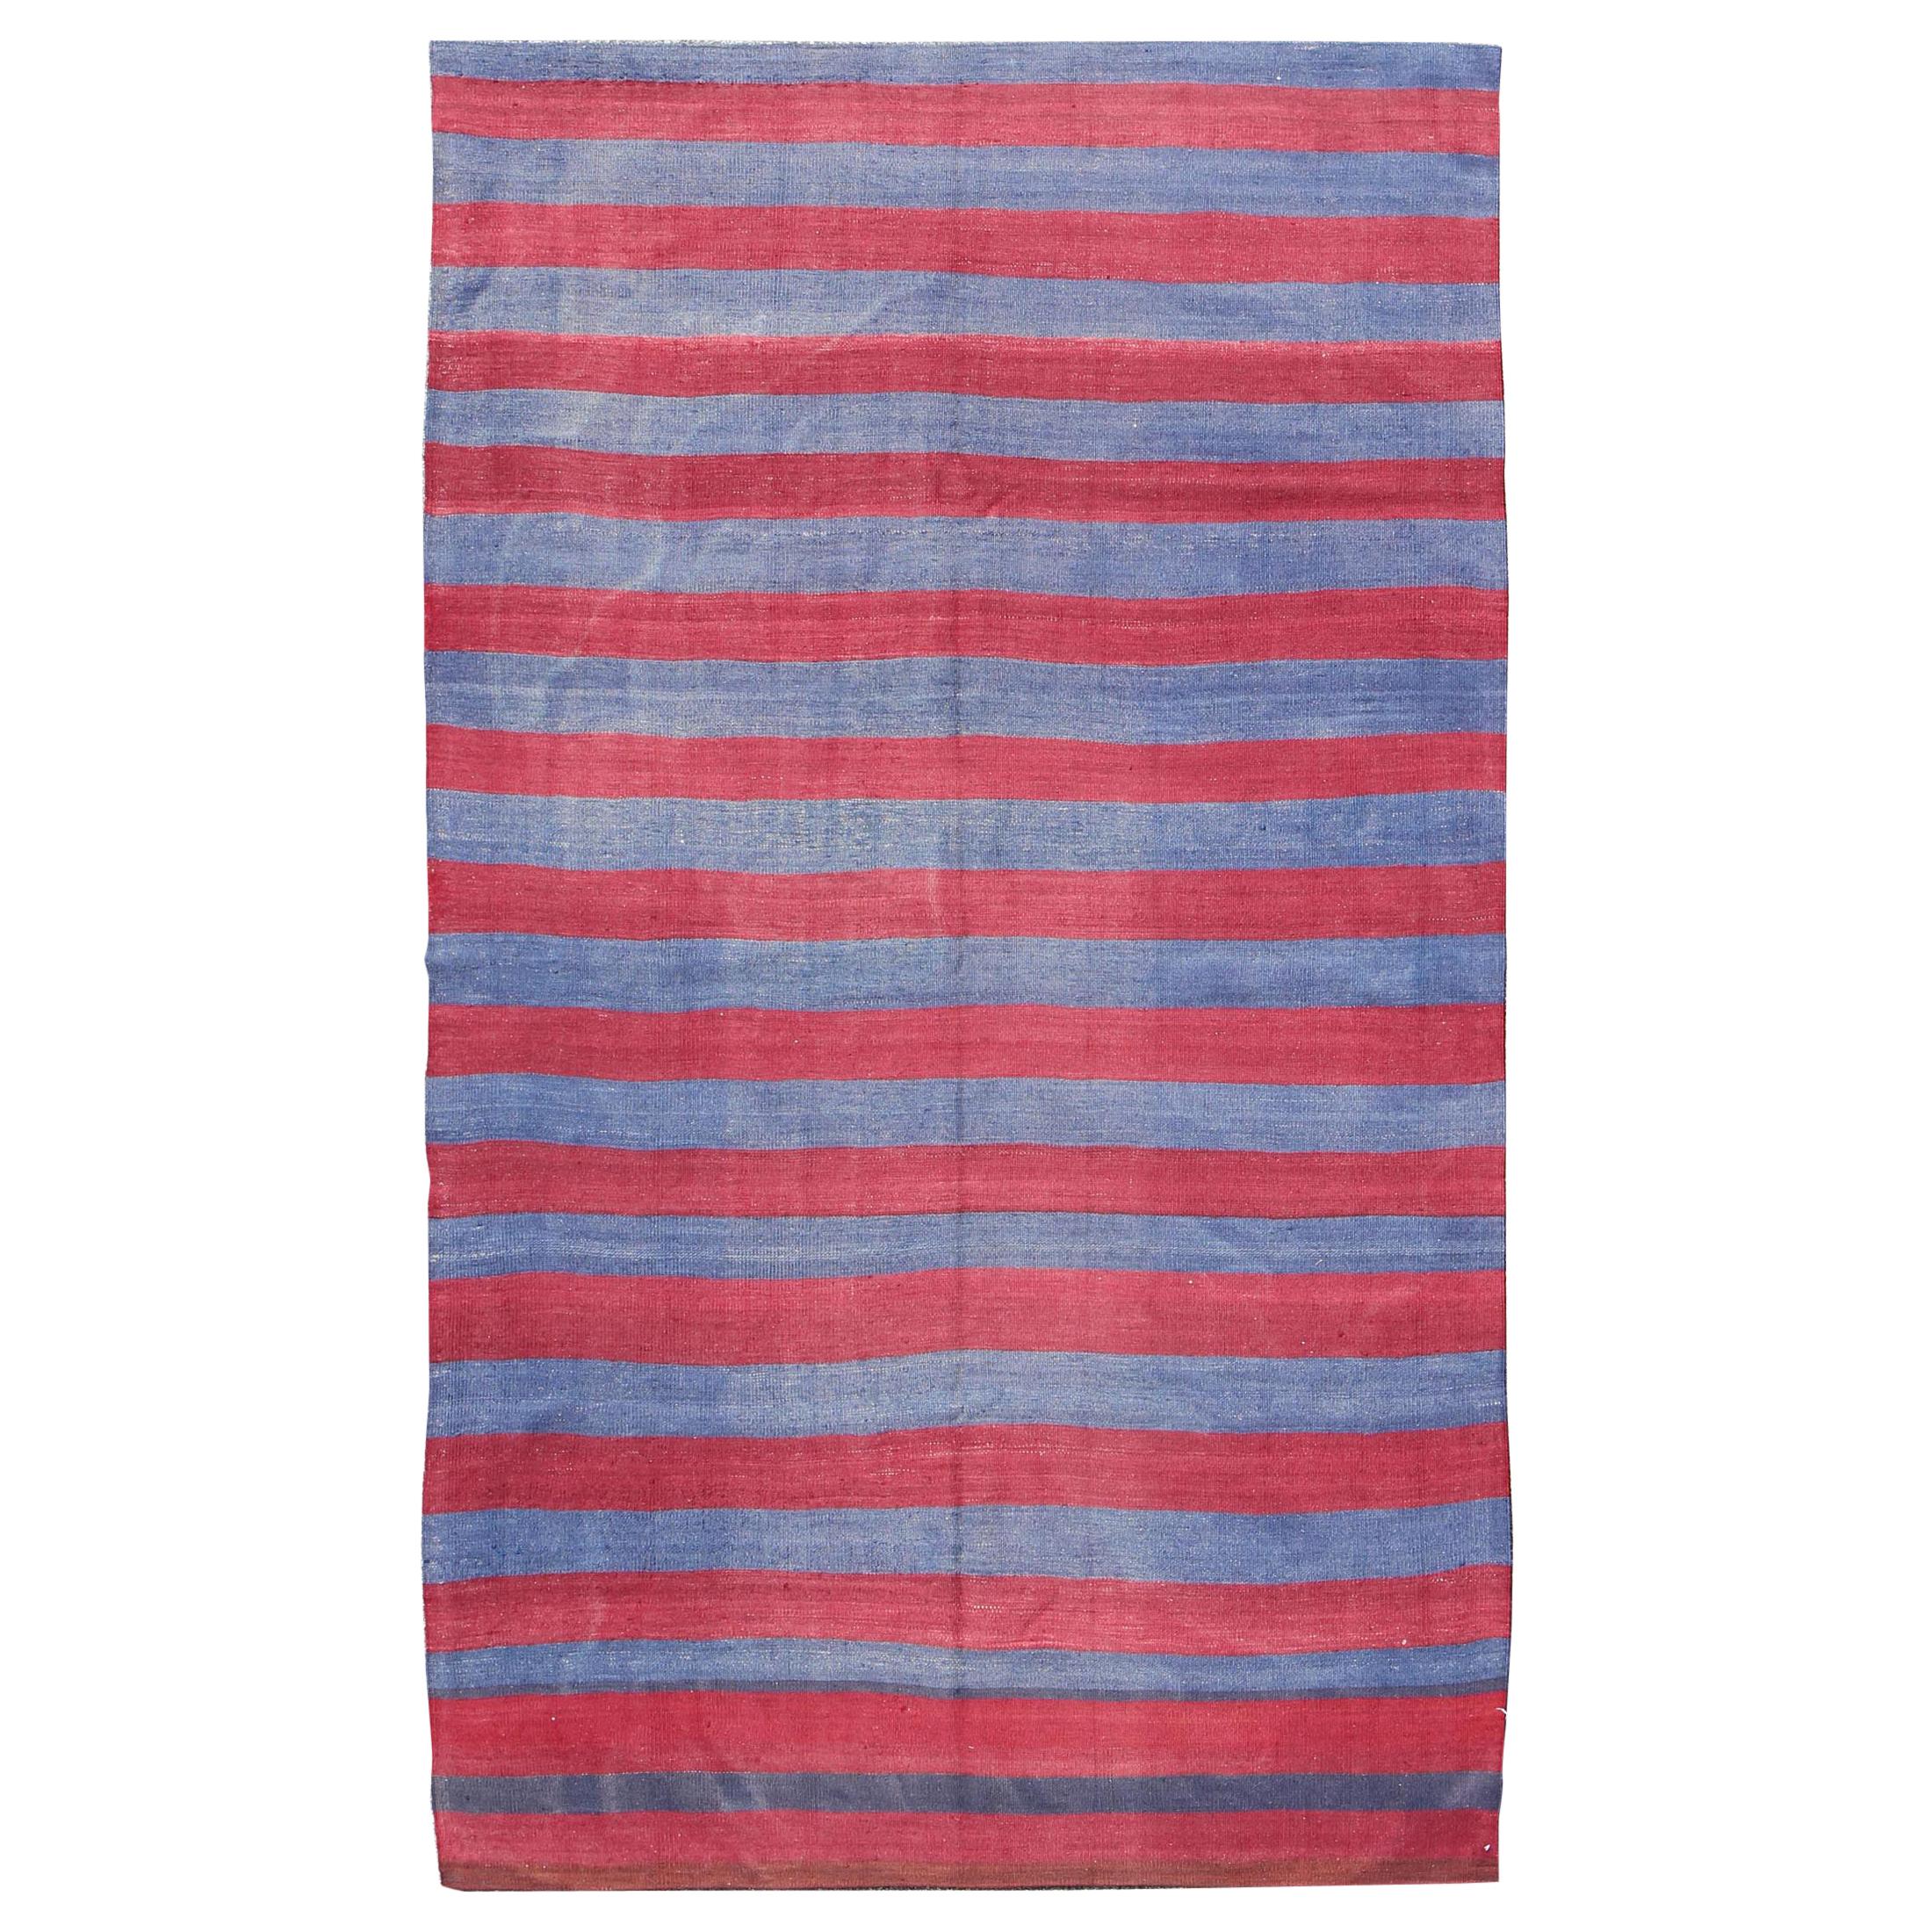 Vintage Striped Turkish Kilim with Casual Modern Design in Red and Blue For Sale